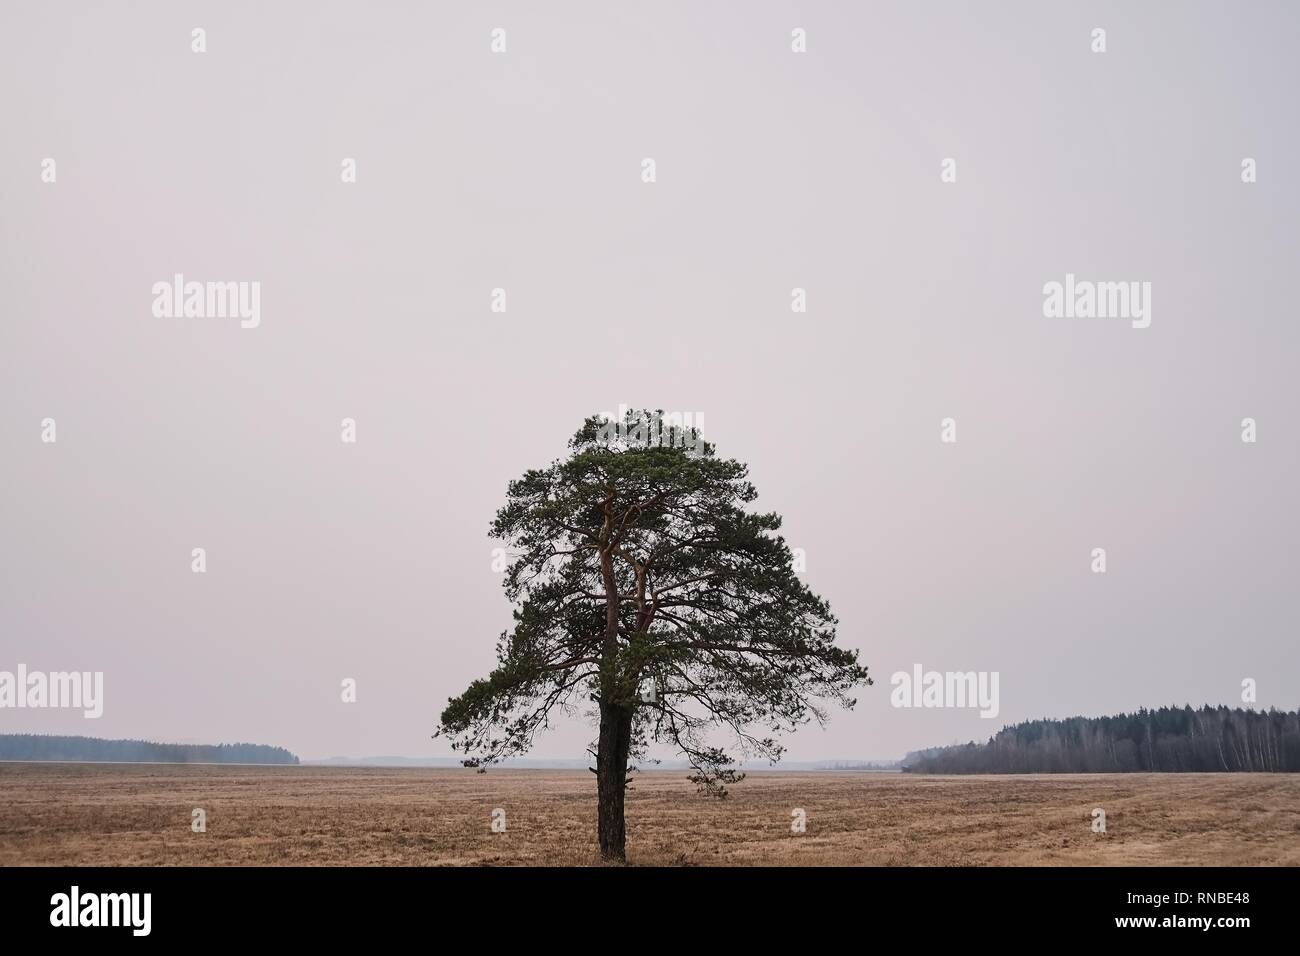 Lonely tree in the middle of a field on a cloudy autumn day Stock Photo